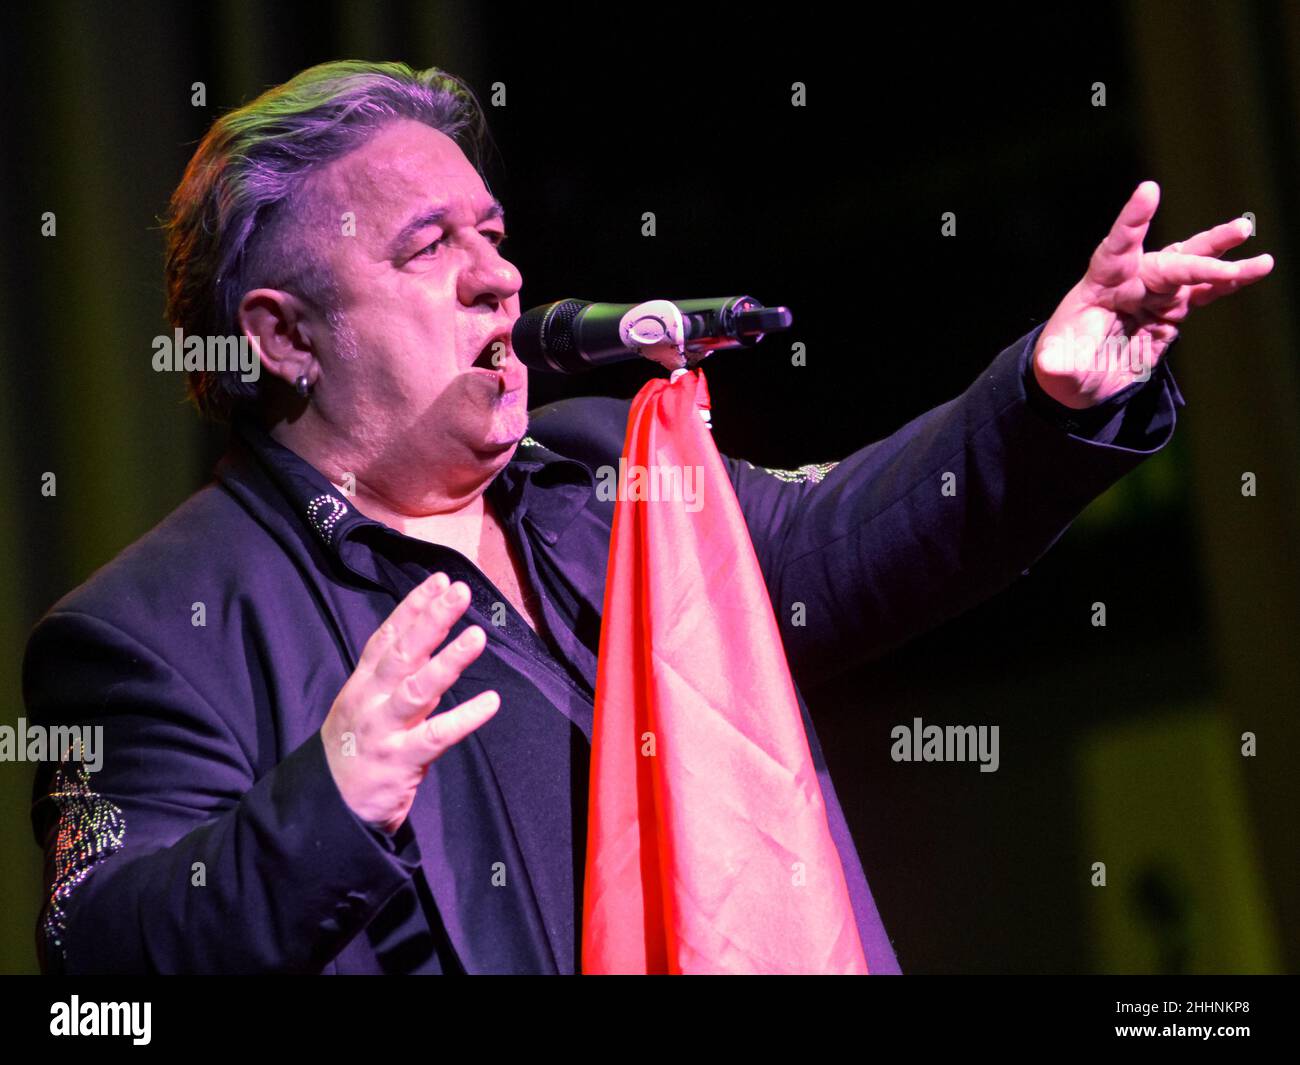 Schmied Loaf, Meat Loaf Tribute Band from Germany with singer Gerhard Schmied acting as Meat Loaf. Concert at Kongresshalle Giessen, Germany, 17th Dec, 2016 --- Fotocredit: Christian Lademann / lademann.media Stock Photo